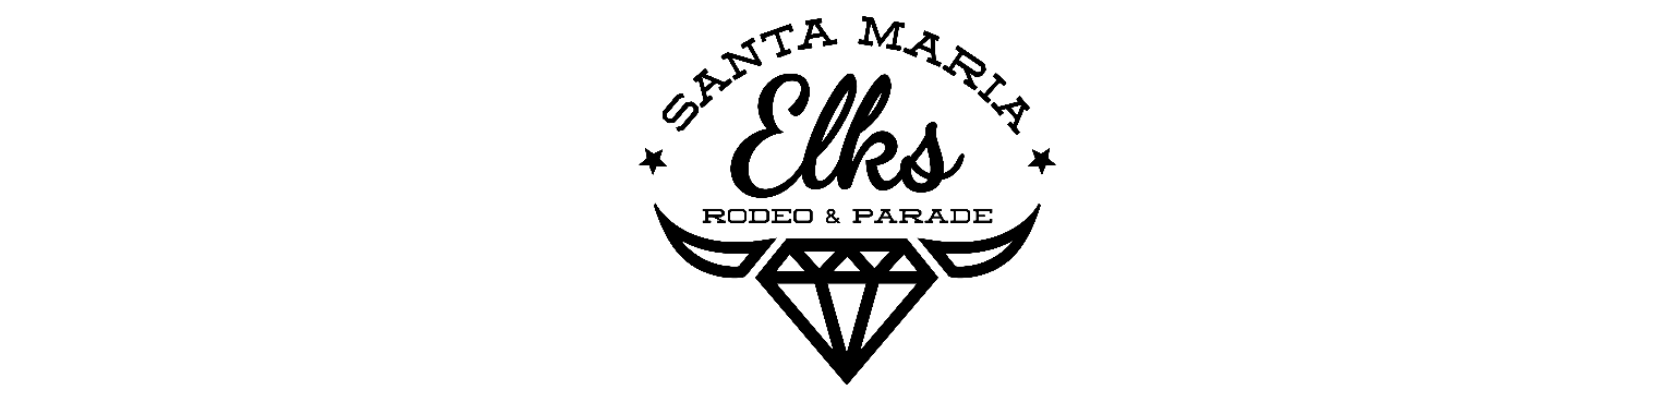 2021 Elks Rodeo Queen Contest Candidates to be Unveiled • Paso Robles Press